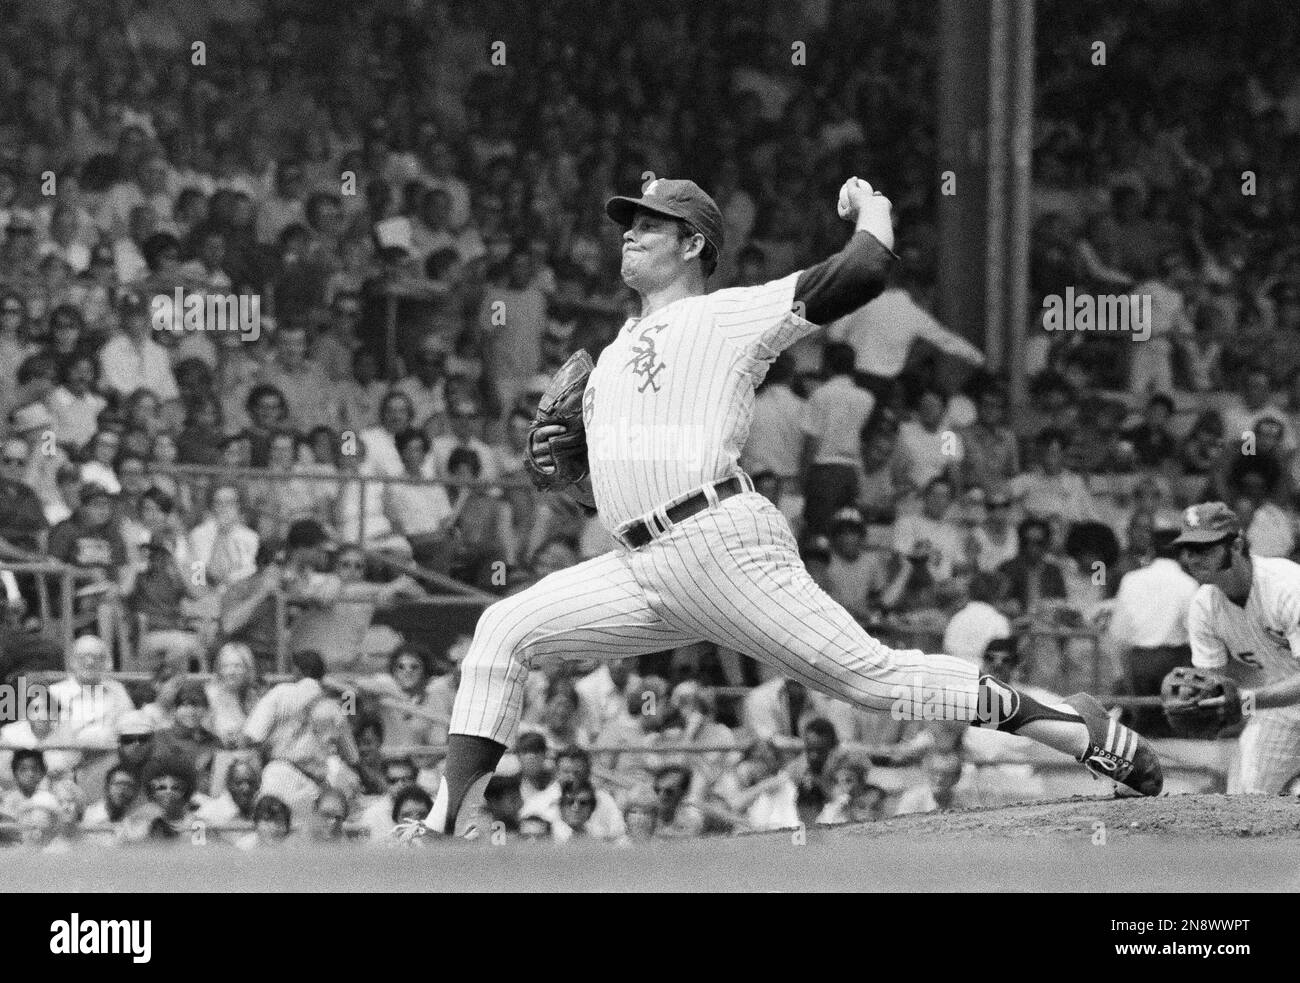 Wilbur Wood, Chicago White Sox pitcher, throws a pitch during game against  Milwaukee Brewers in Chicago, Wednesday, August 17, 1972. Wood, who notched  his 21st victory, Wednesday, was pulled after the seventh